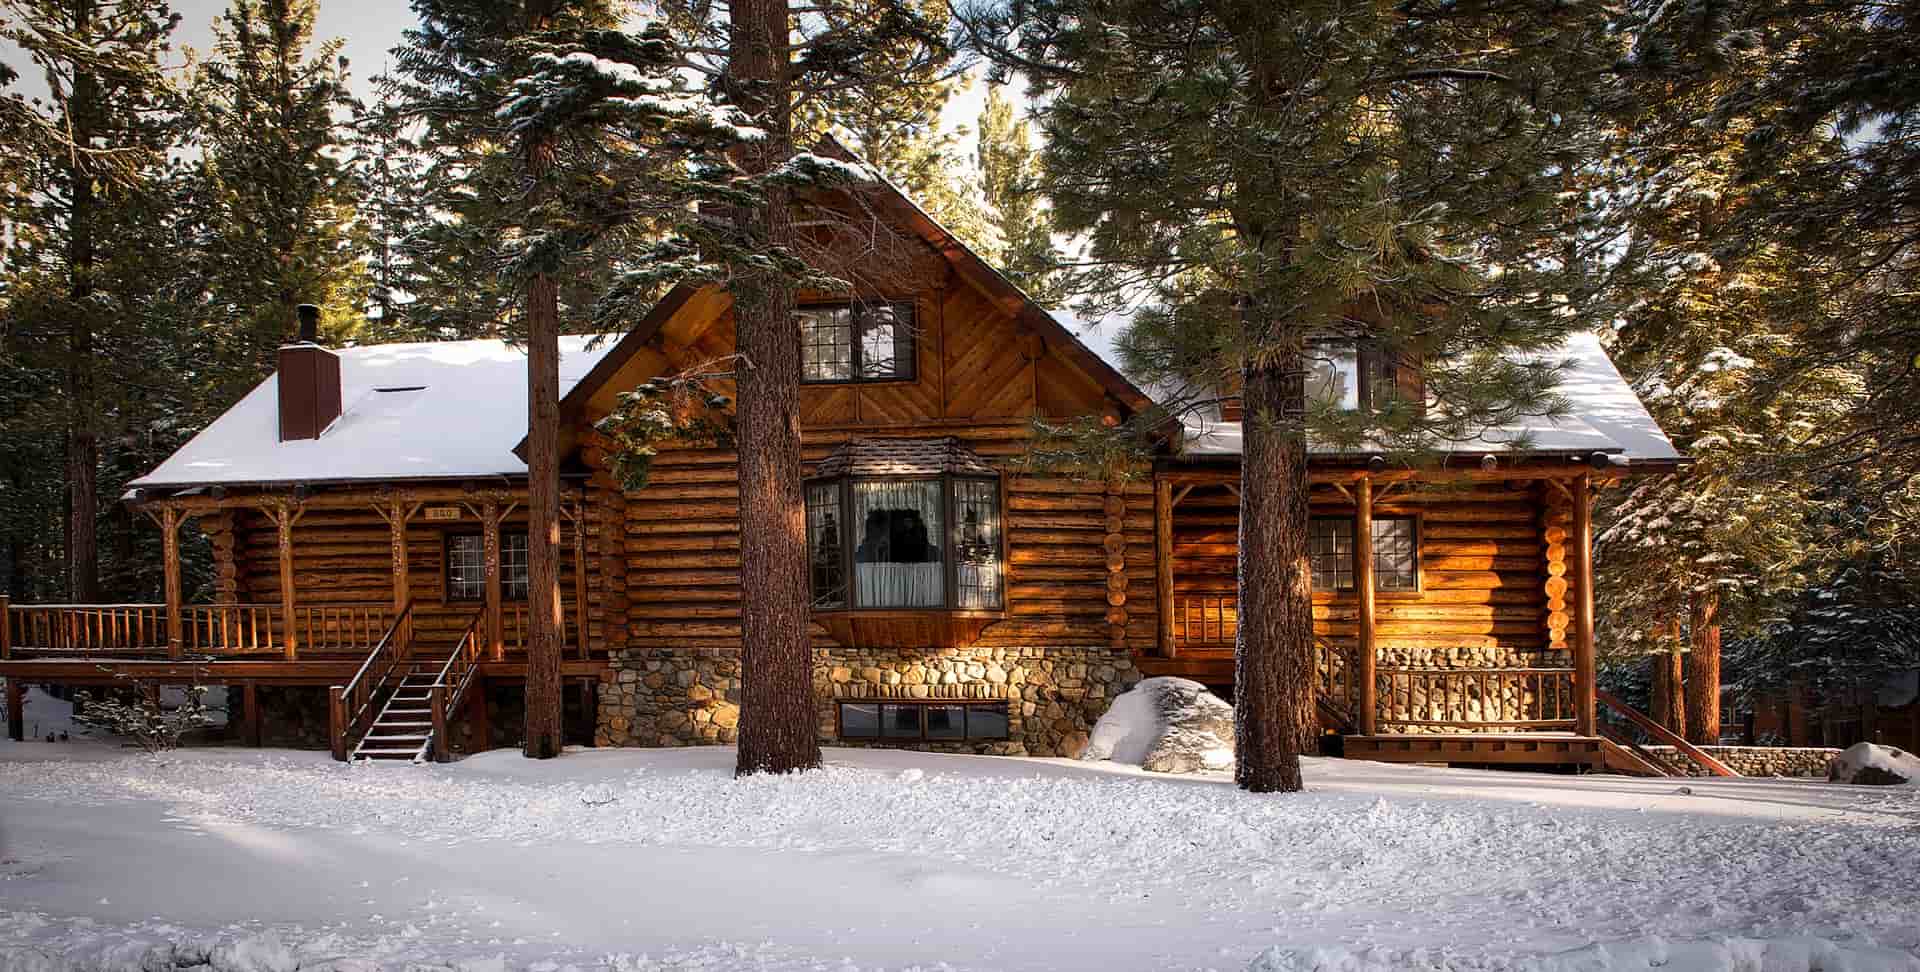 What Makes a Good Rental Cabin?